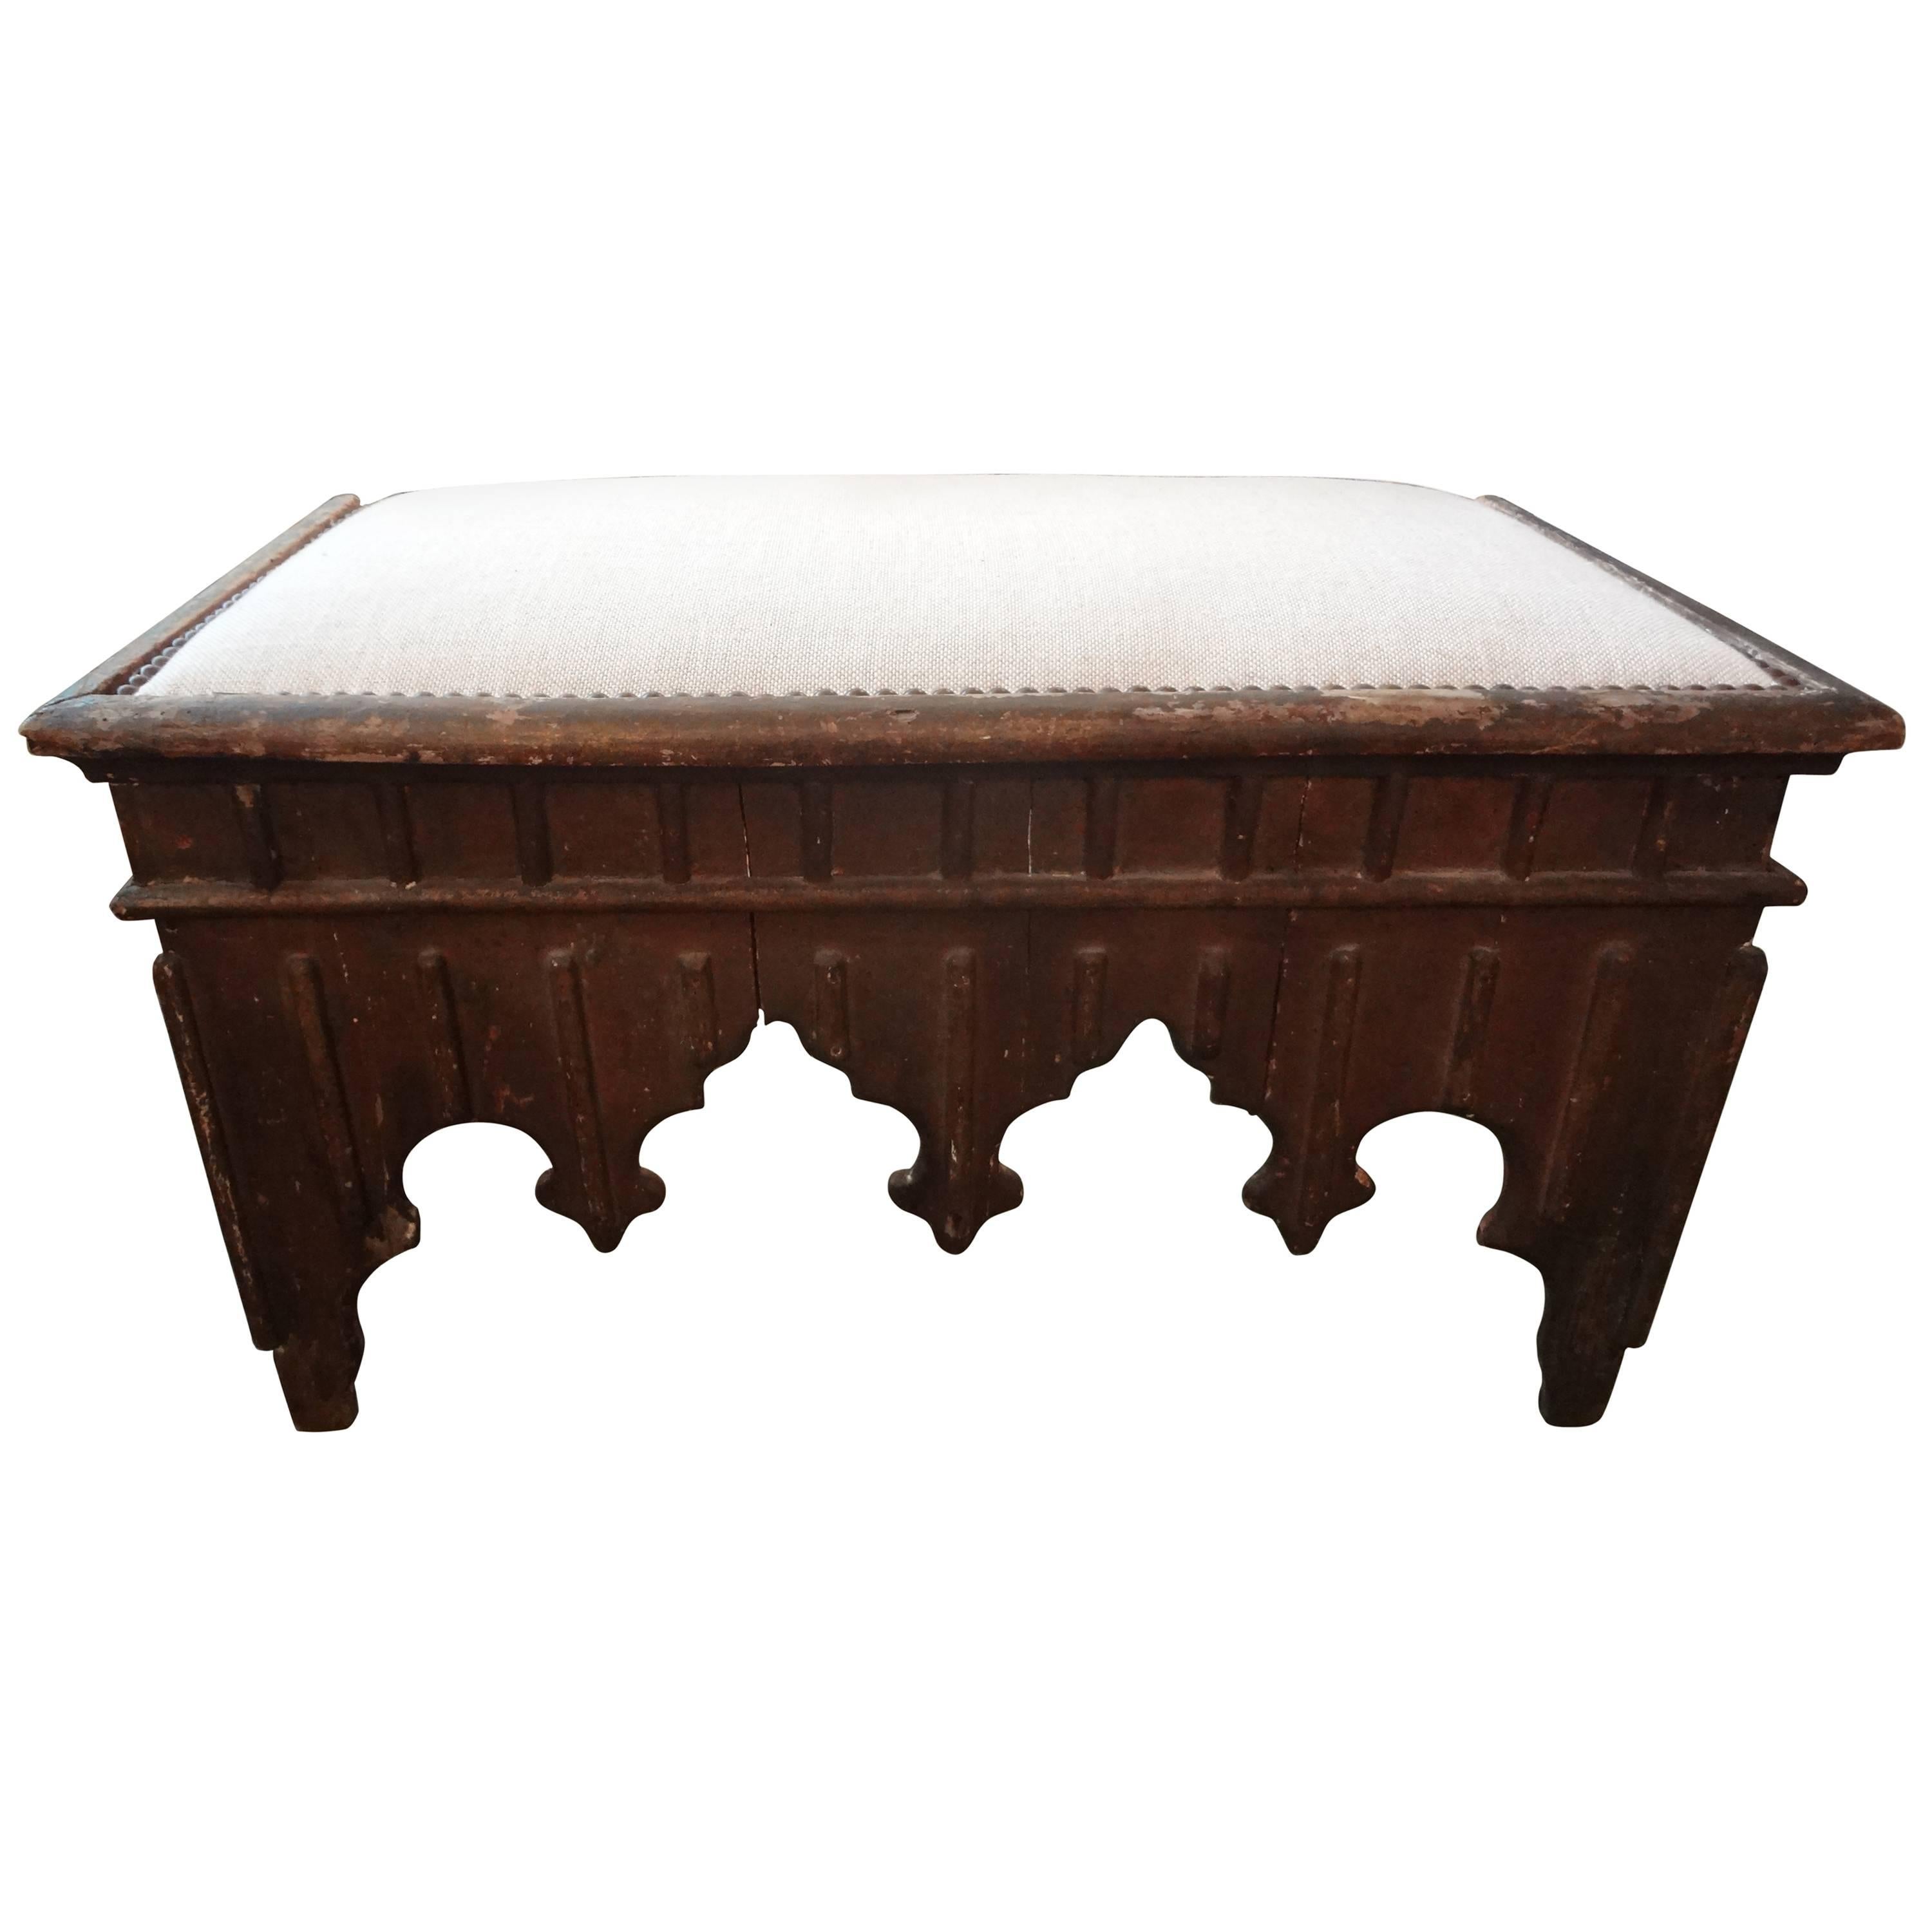 19th Century Moroccan Bench